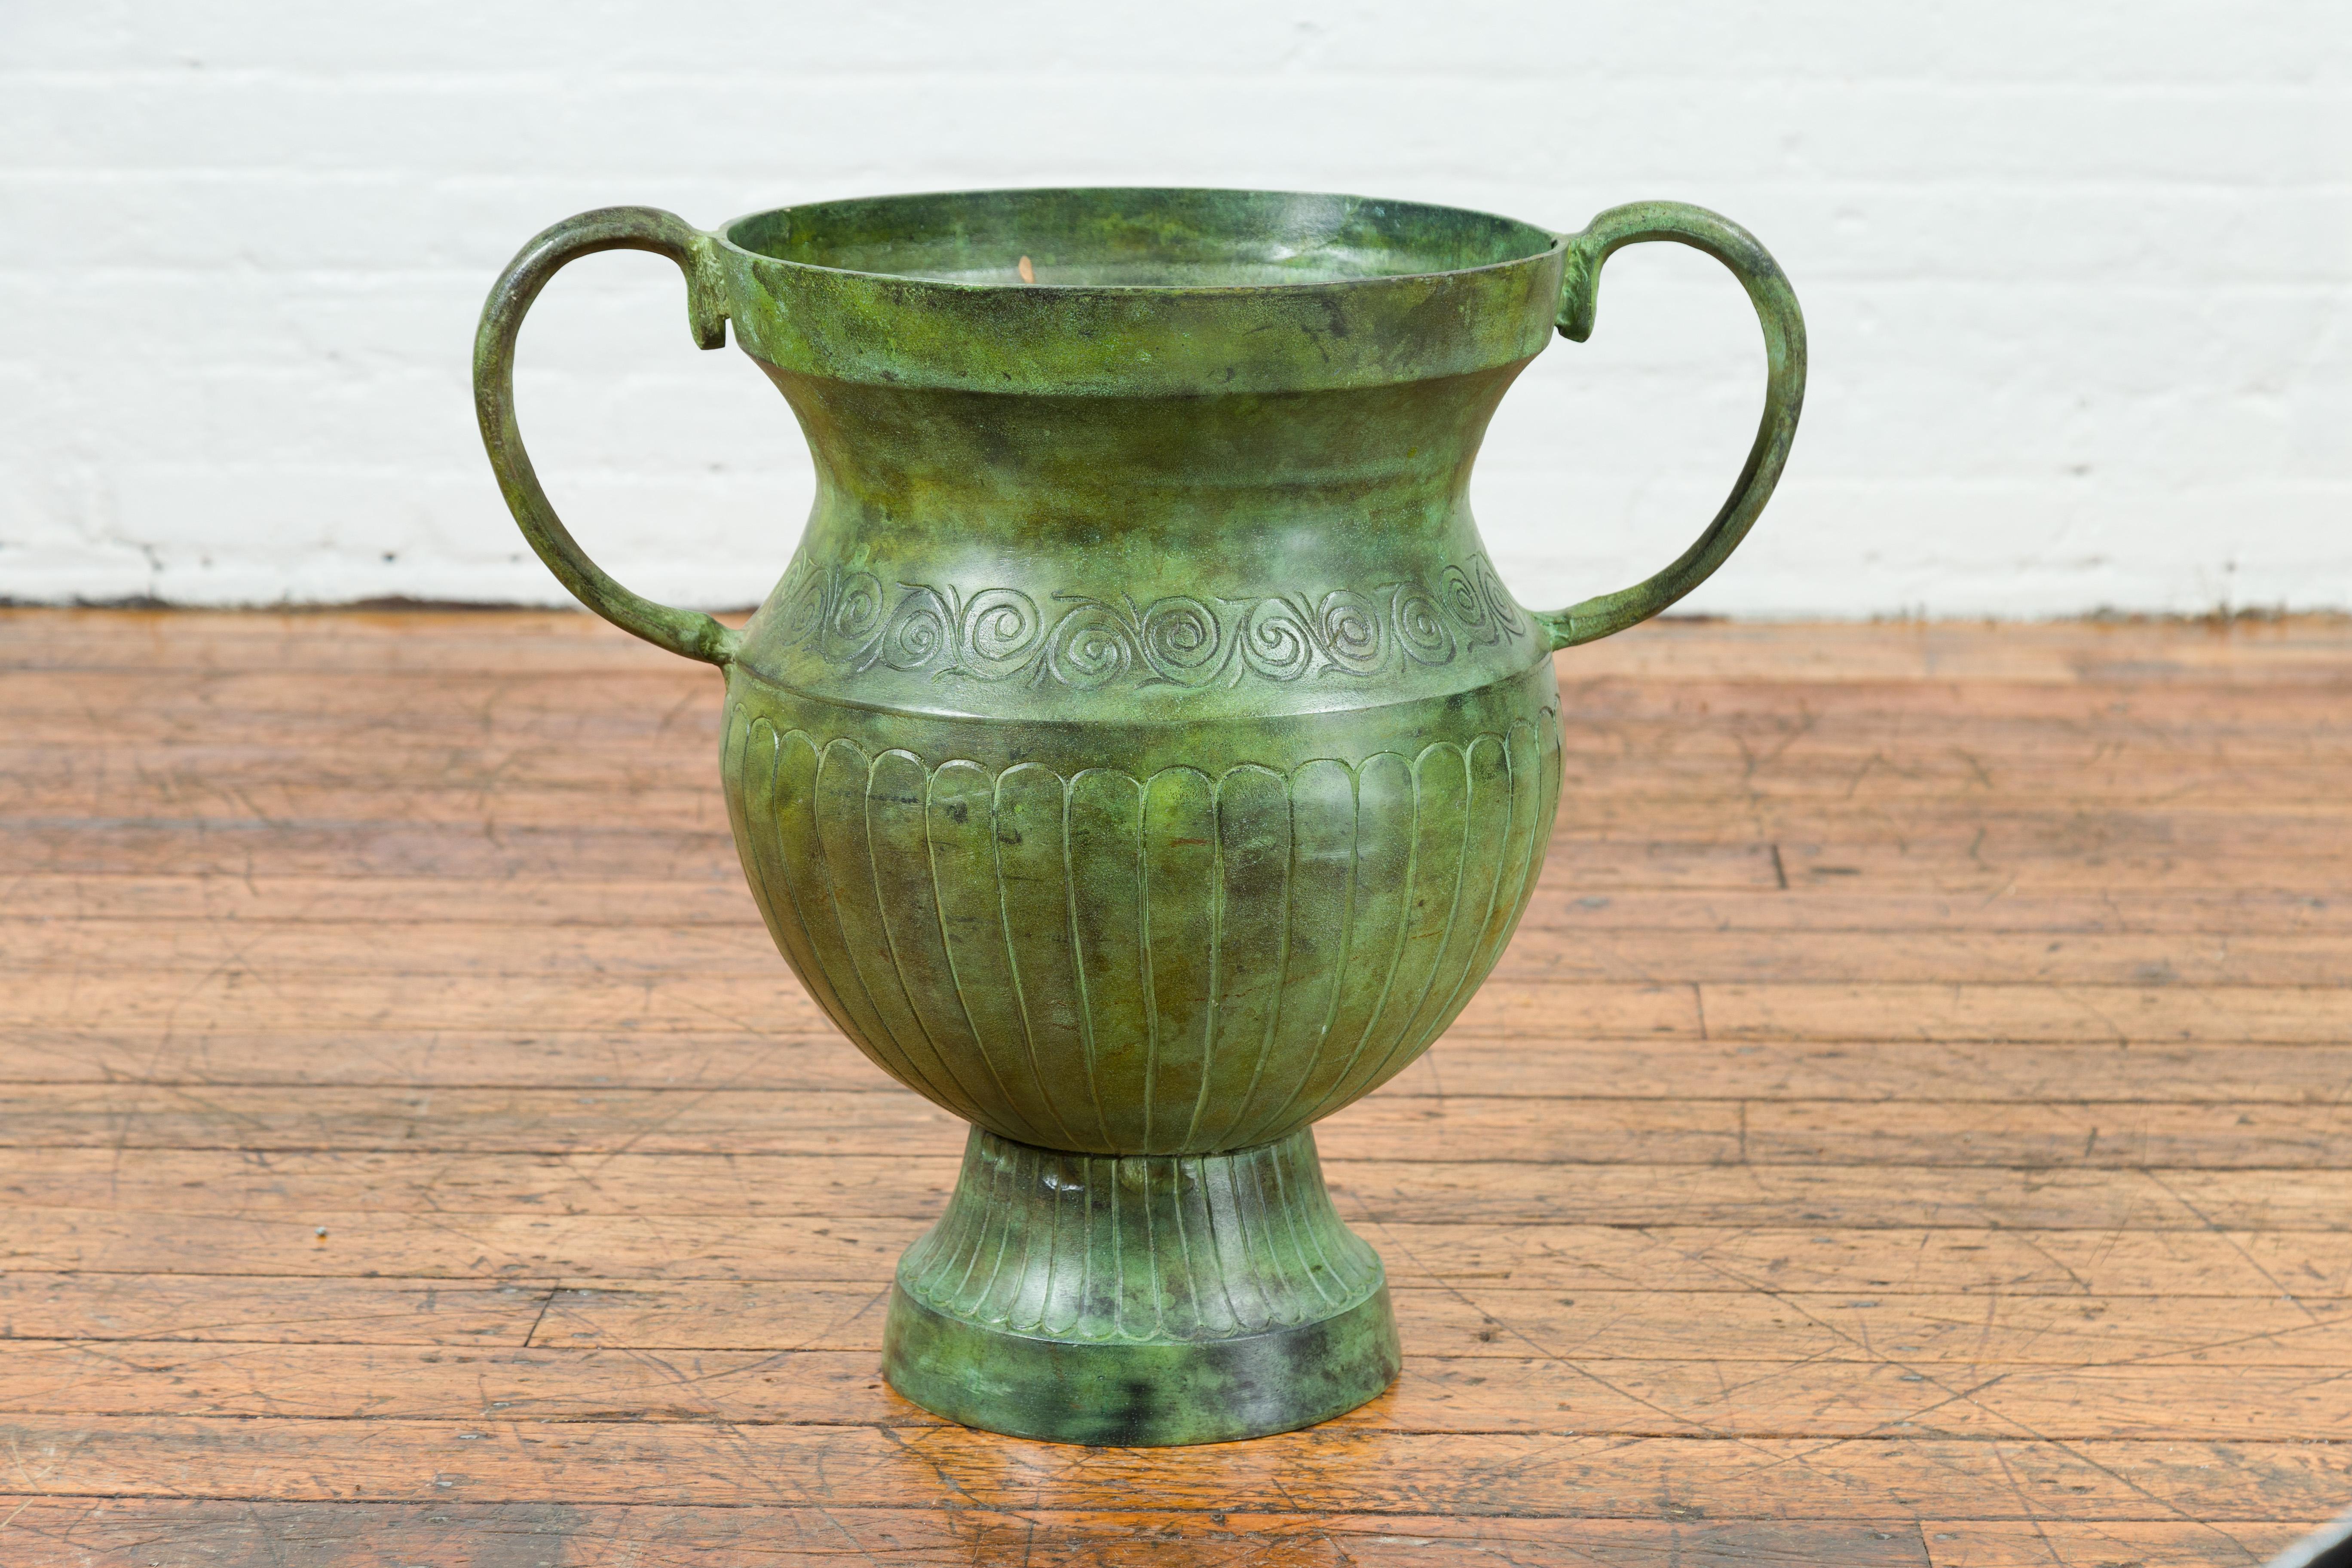 Contemporary Classical Style Urn with Verde Patina, Large Handles and Gadroons In Good Condition For Sale In Yonkers, NY